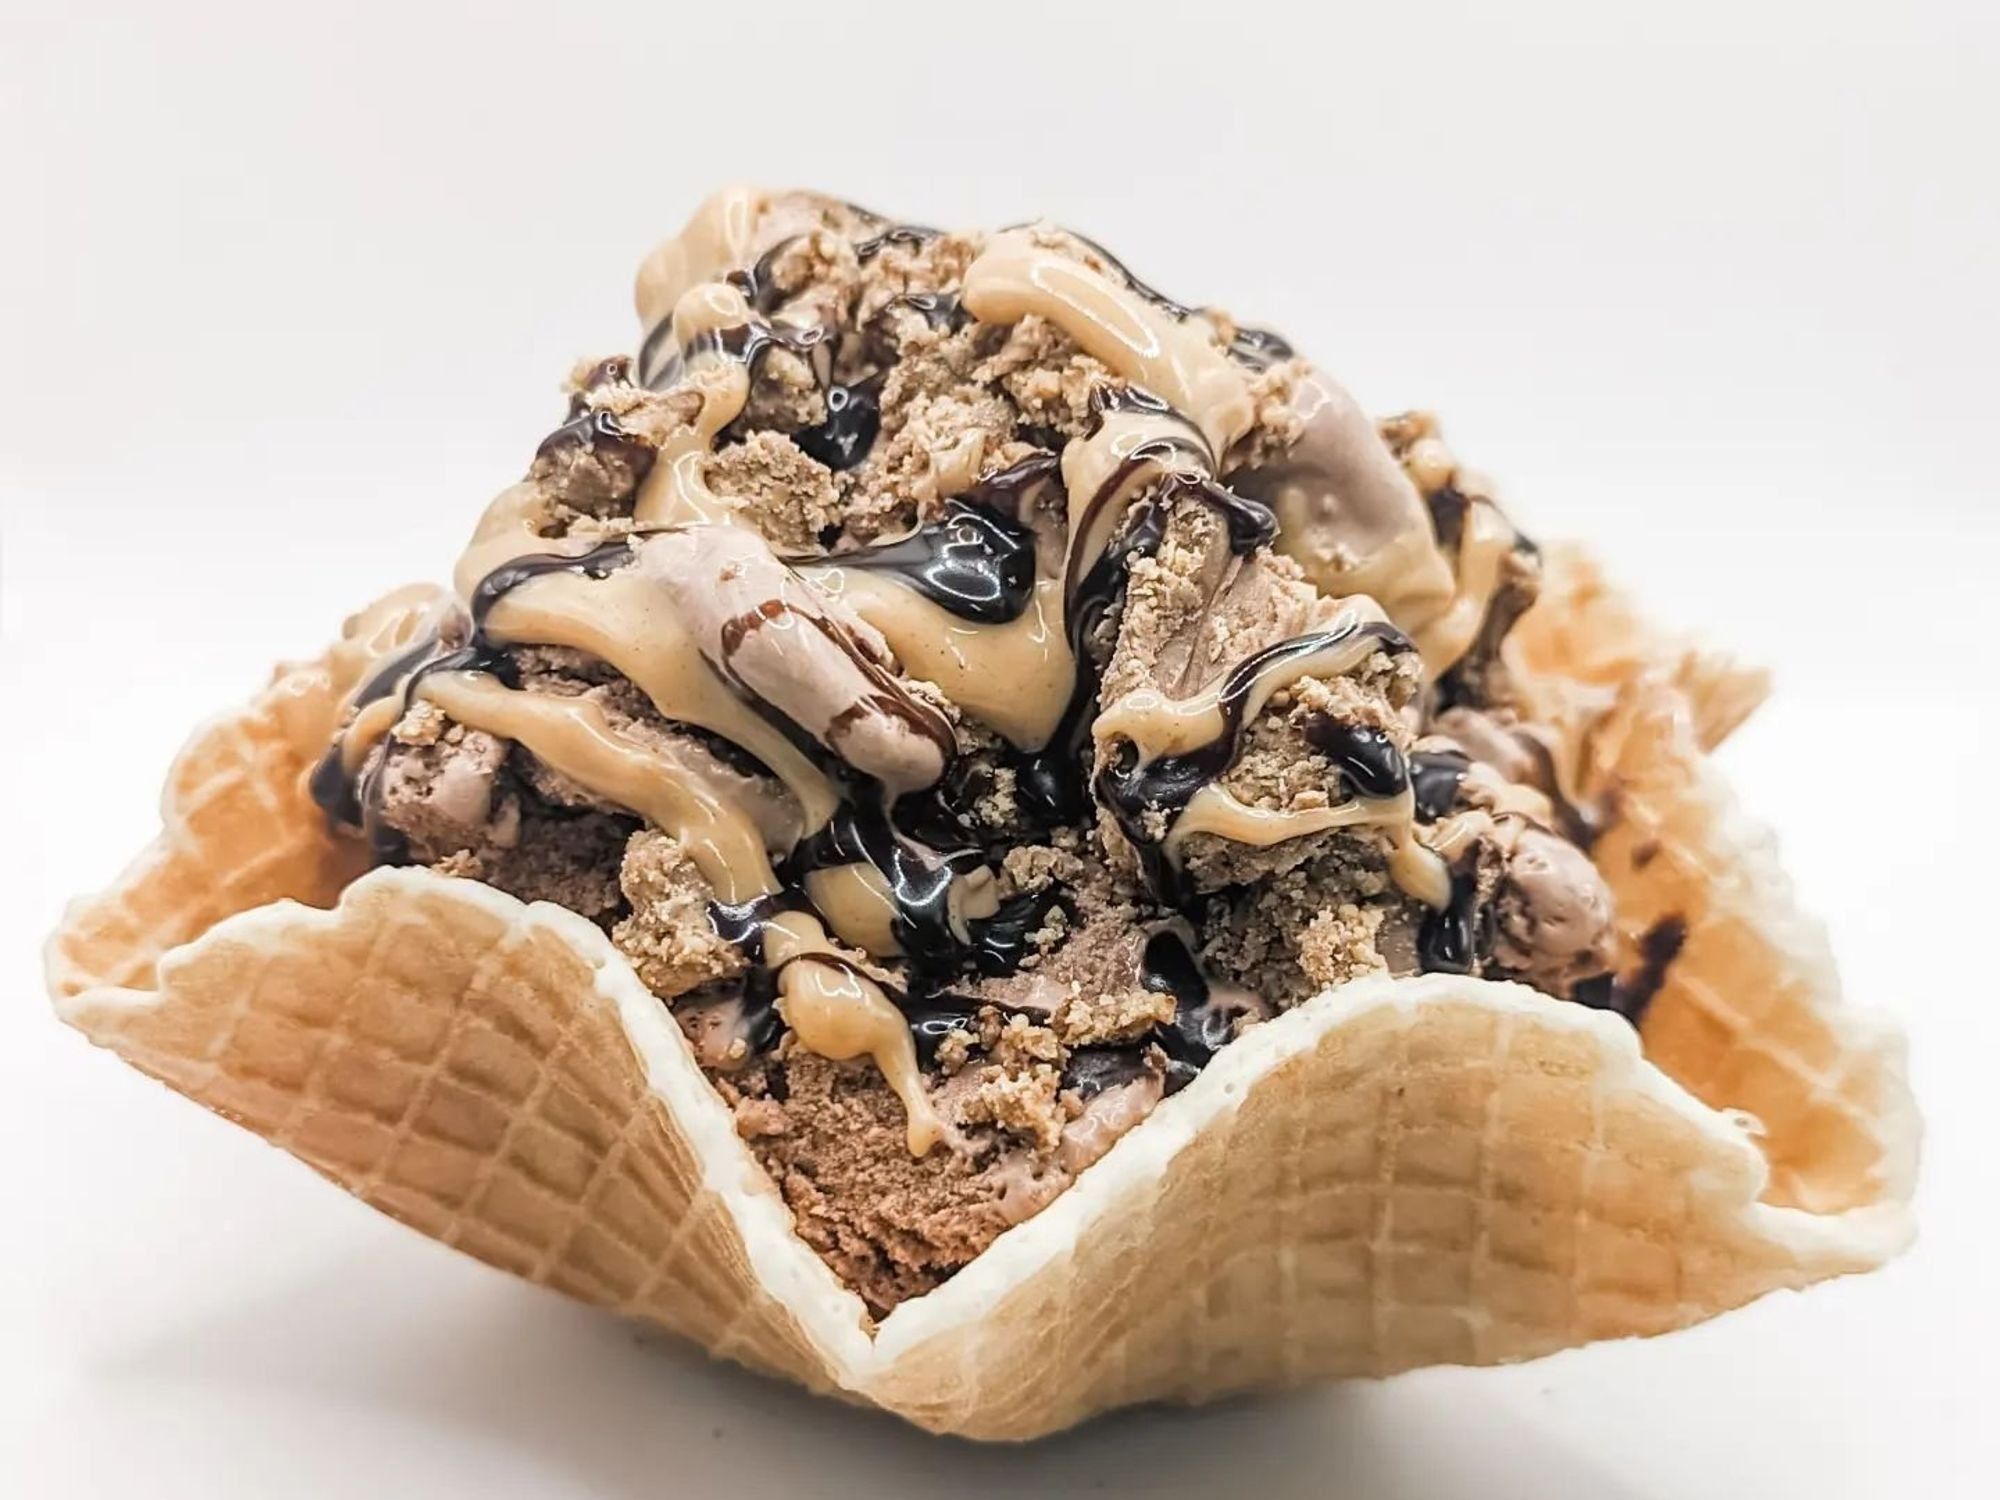 Ice cream shop noted for its clever 'waffle bowls' to open in